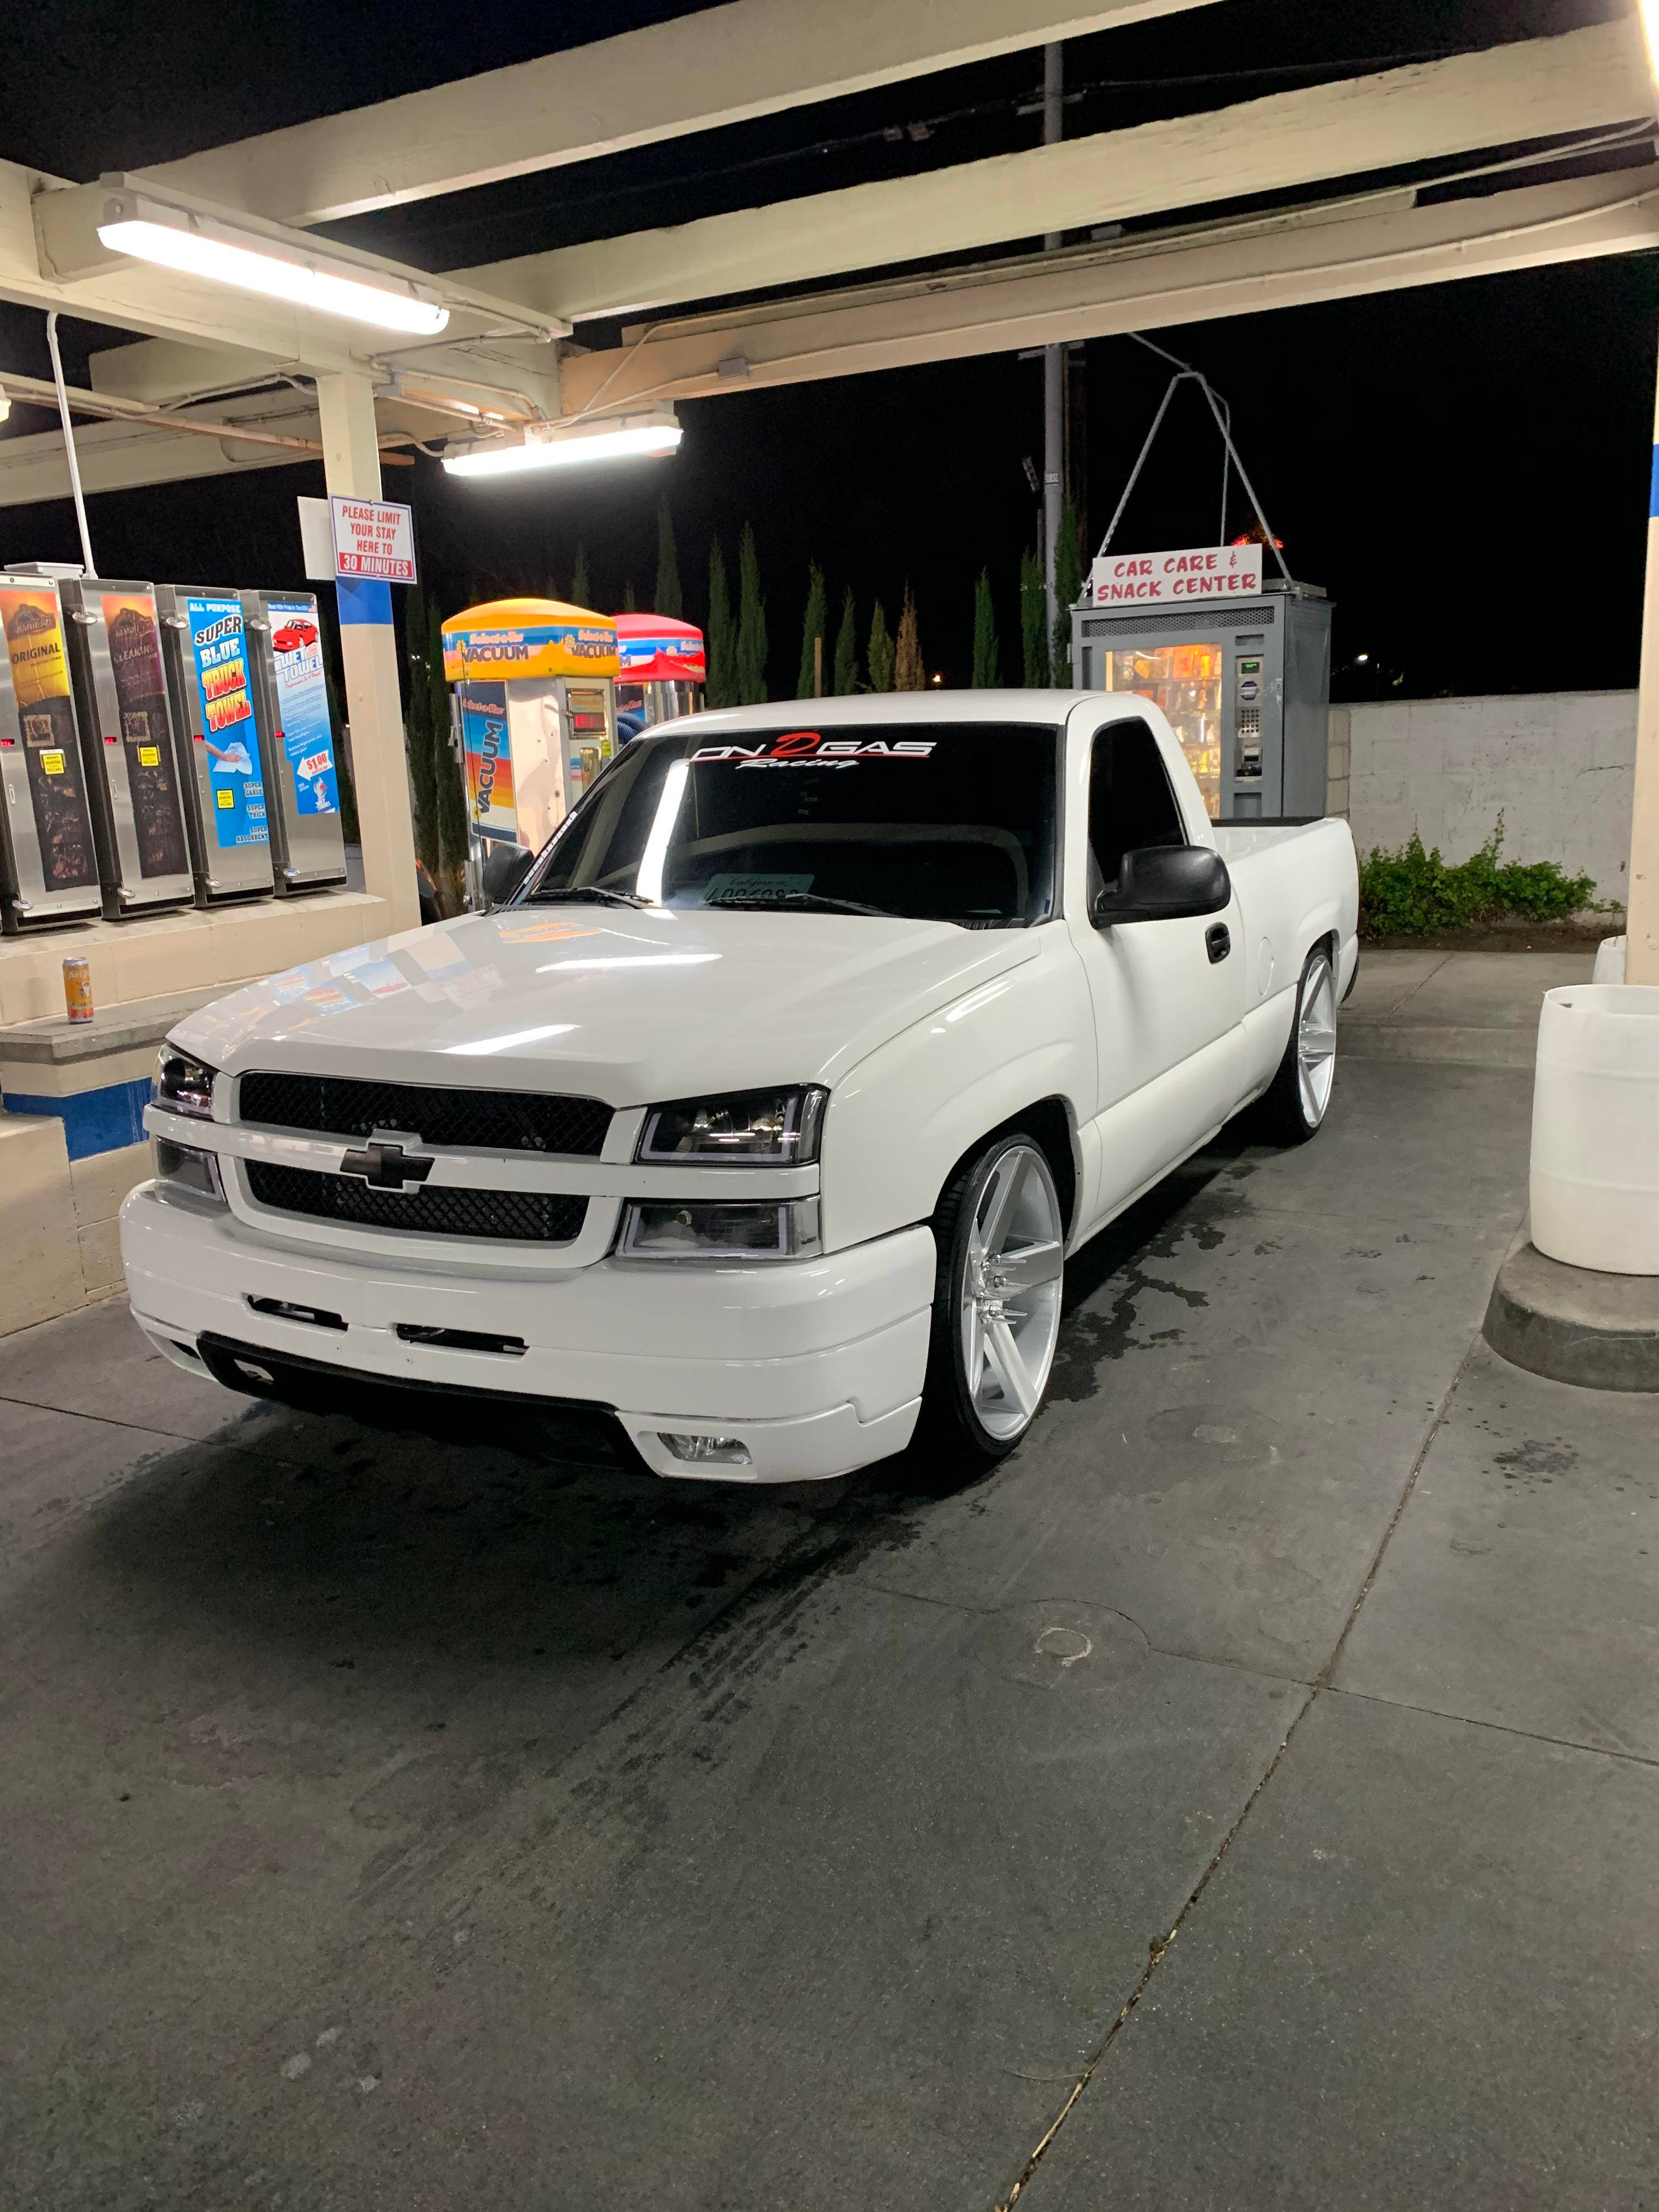 Bulky White Dropped Truck